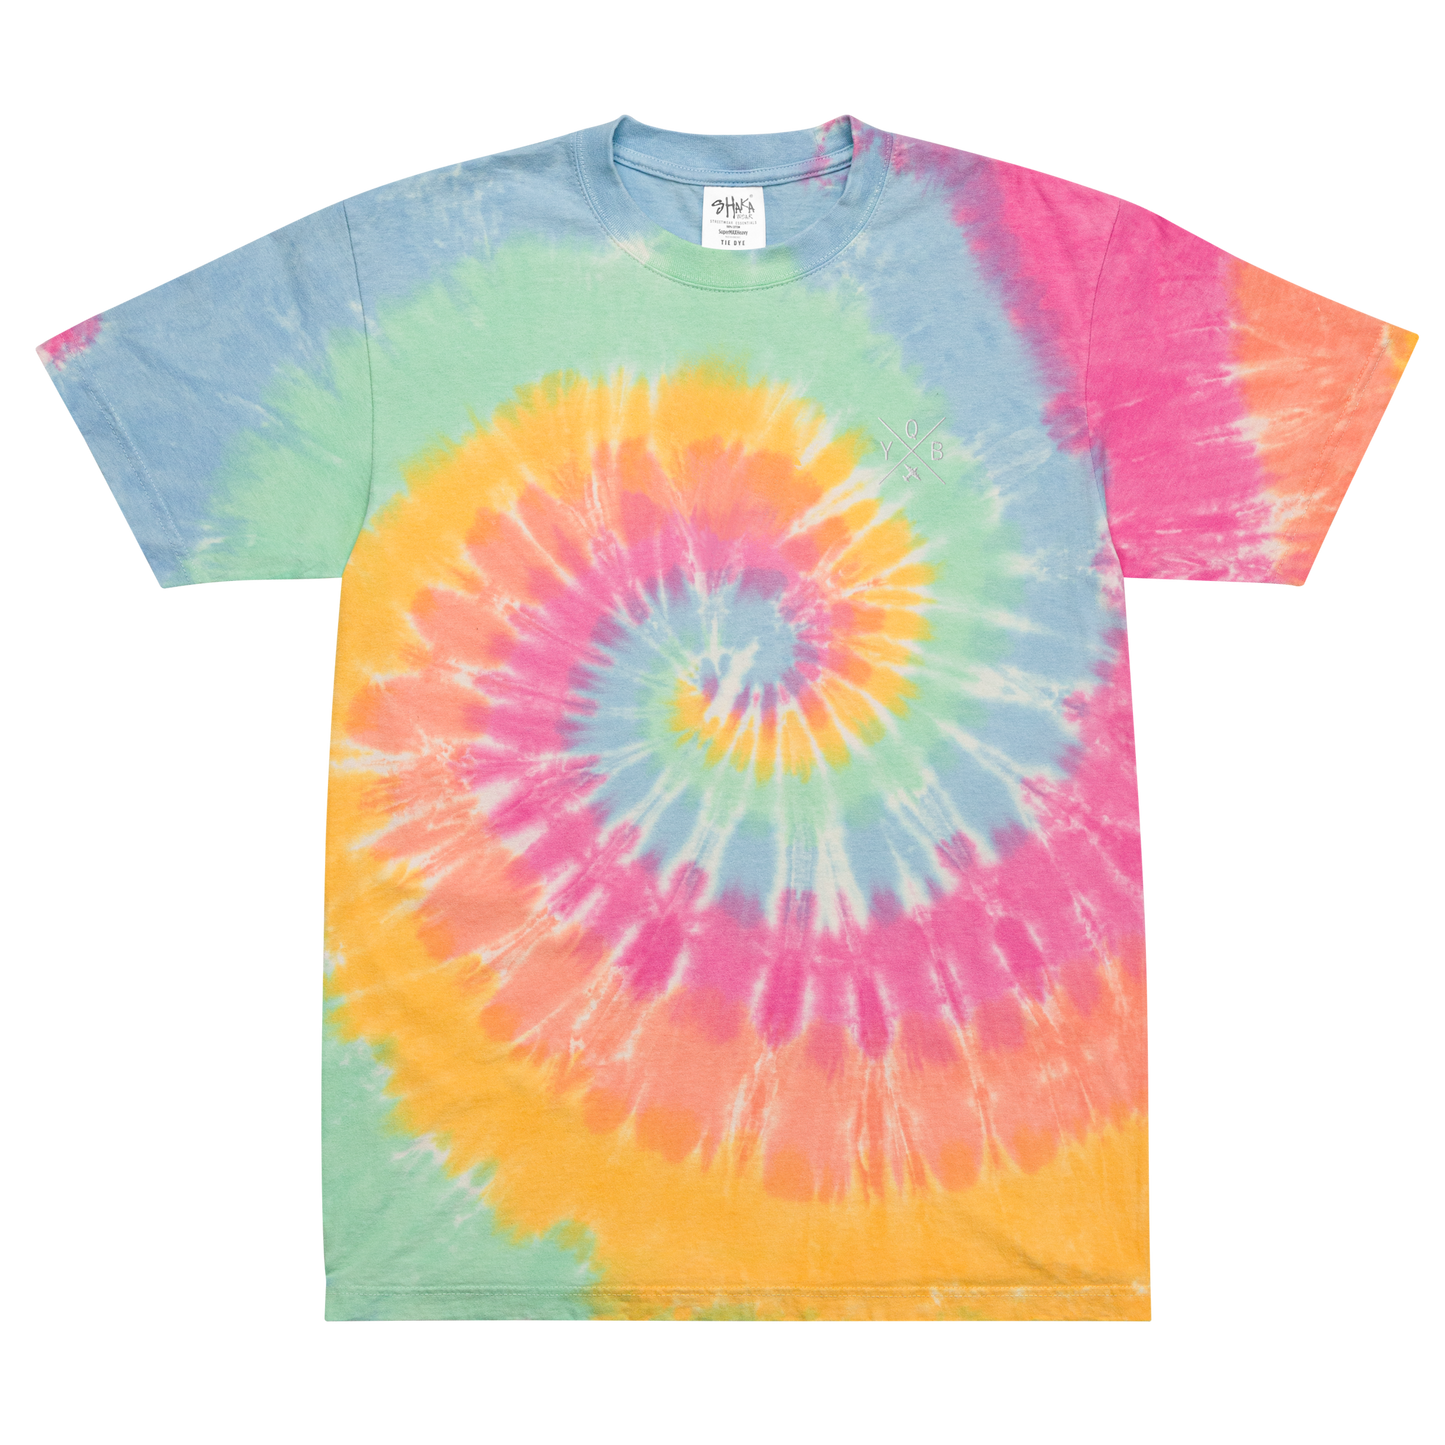 Crossed-X Oversized Tie-Dye T-Shirt • YQB Quebec City • YHM Designs - Image 02